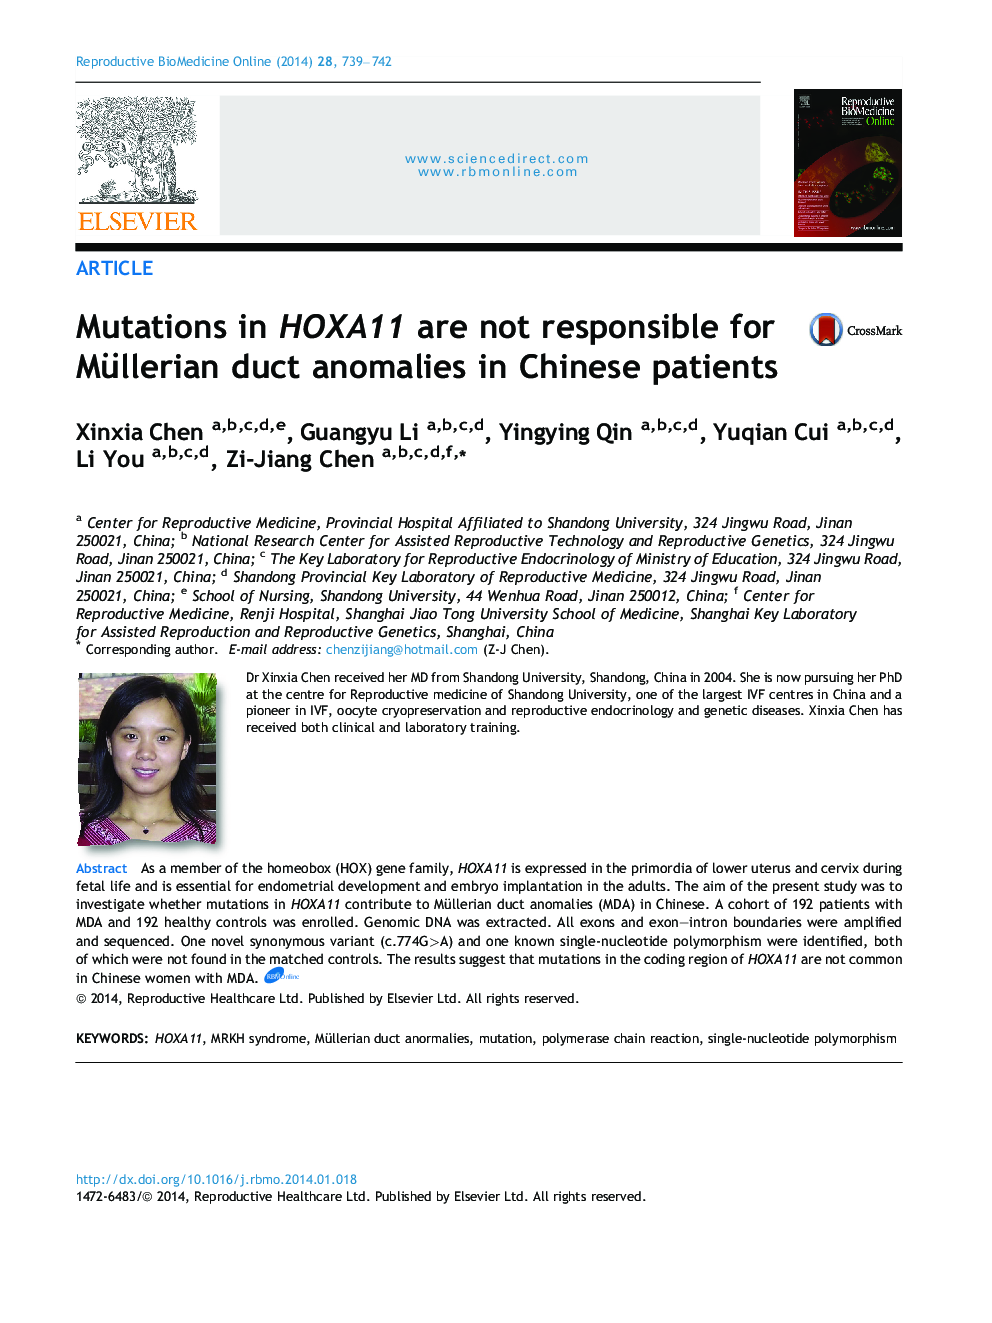 Mutations in HOXA11 are not responsible for Müllerian duct anomalies in Chinese patients 